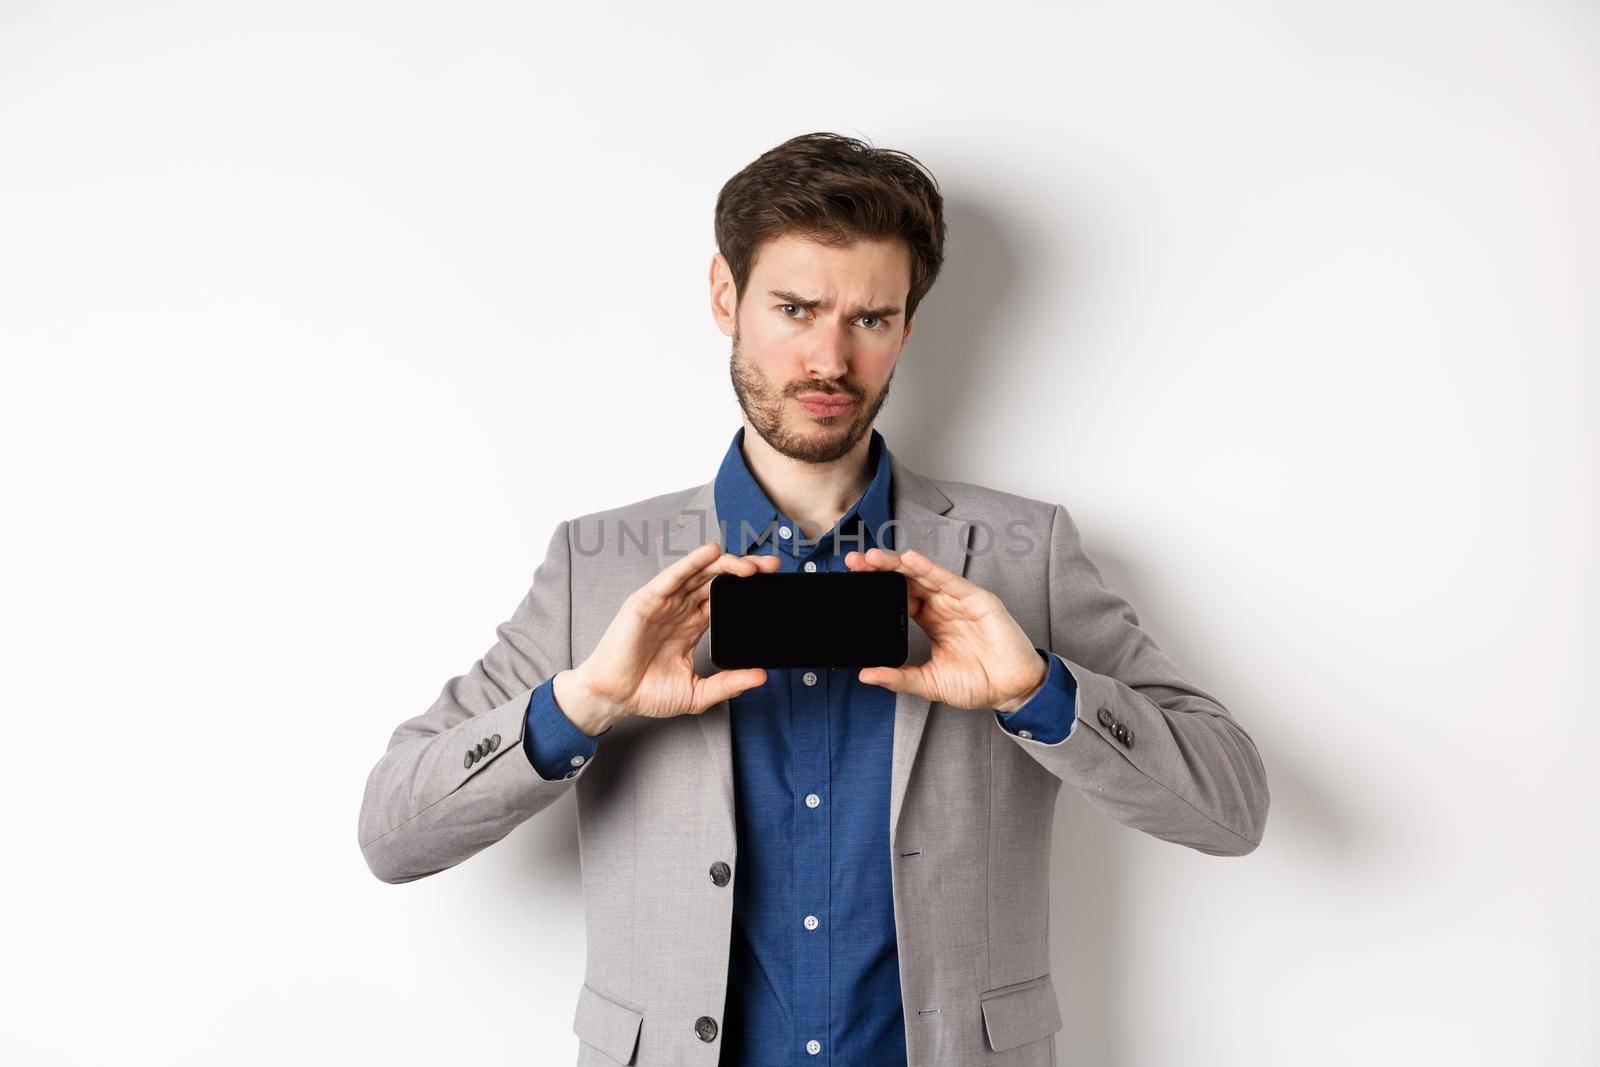 E-commerce and online shopping concept. Hesitant frowning man showing empty smartphone screen, standing on white background.